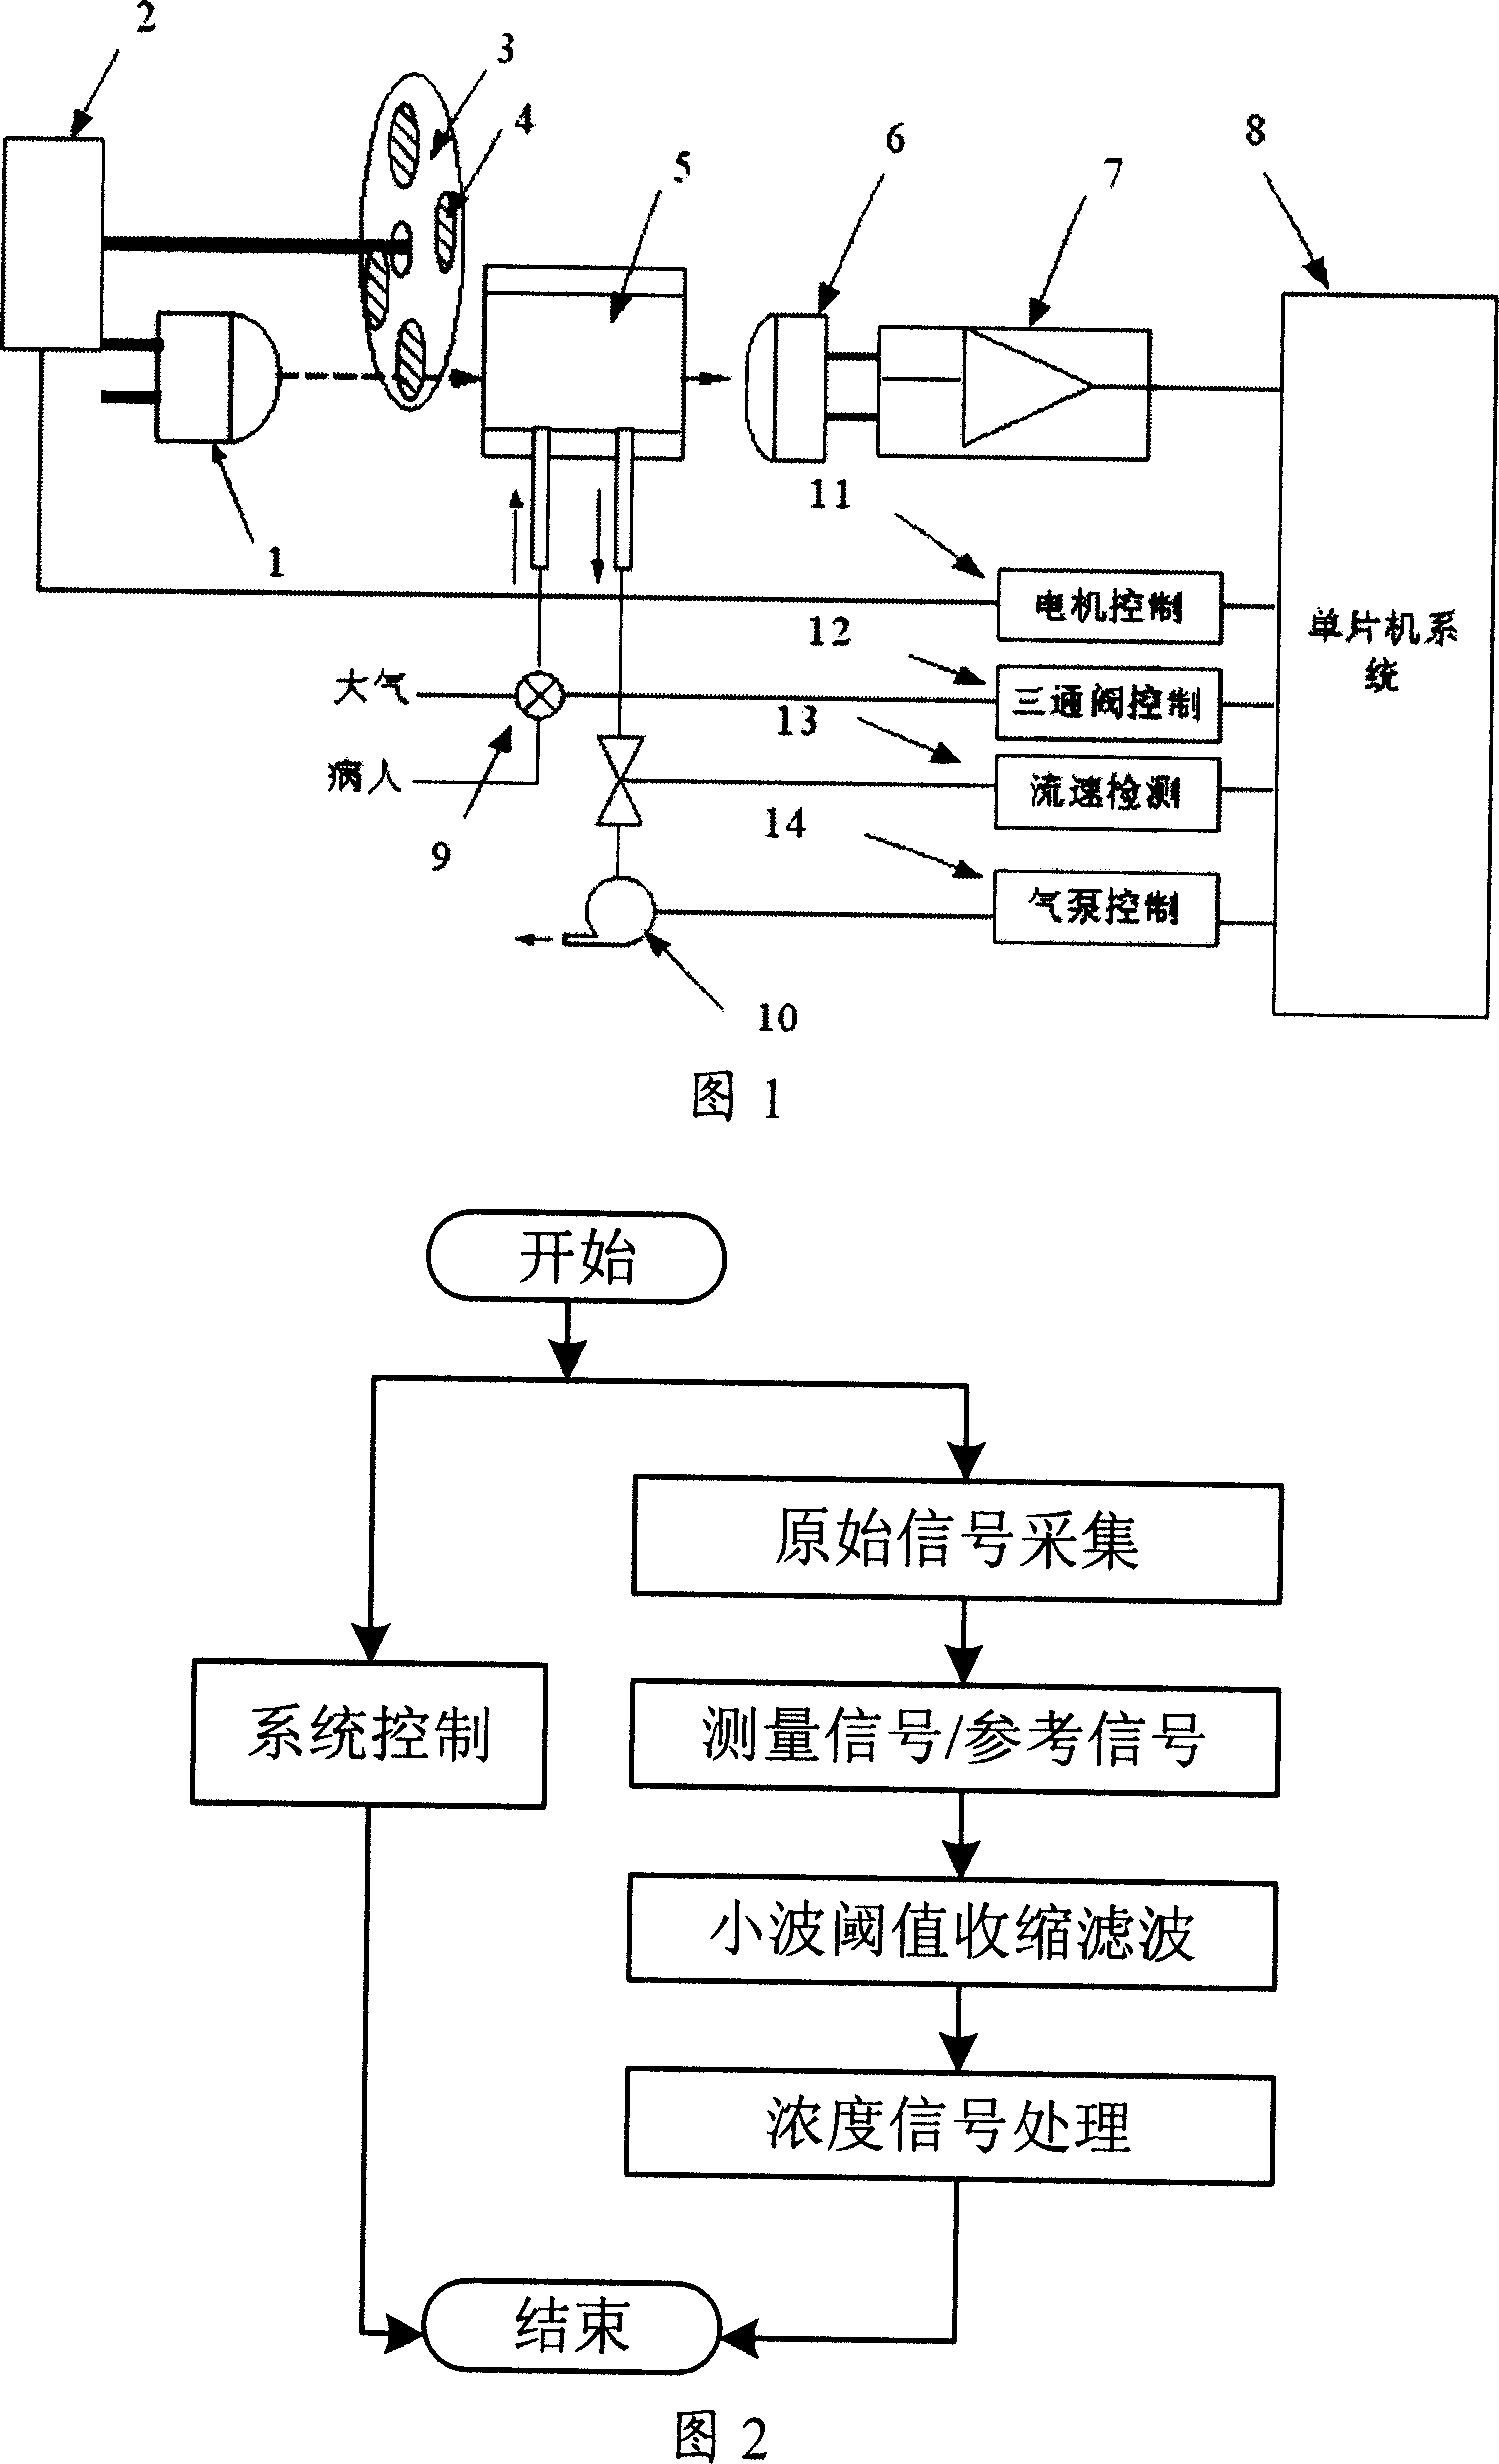 Method and device for improving measurement precision of gas analyzer